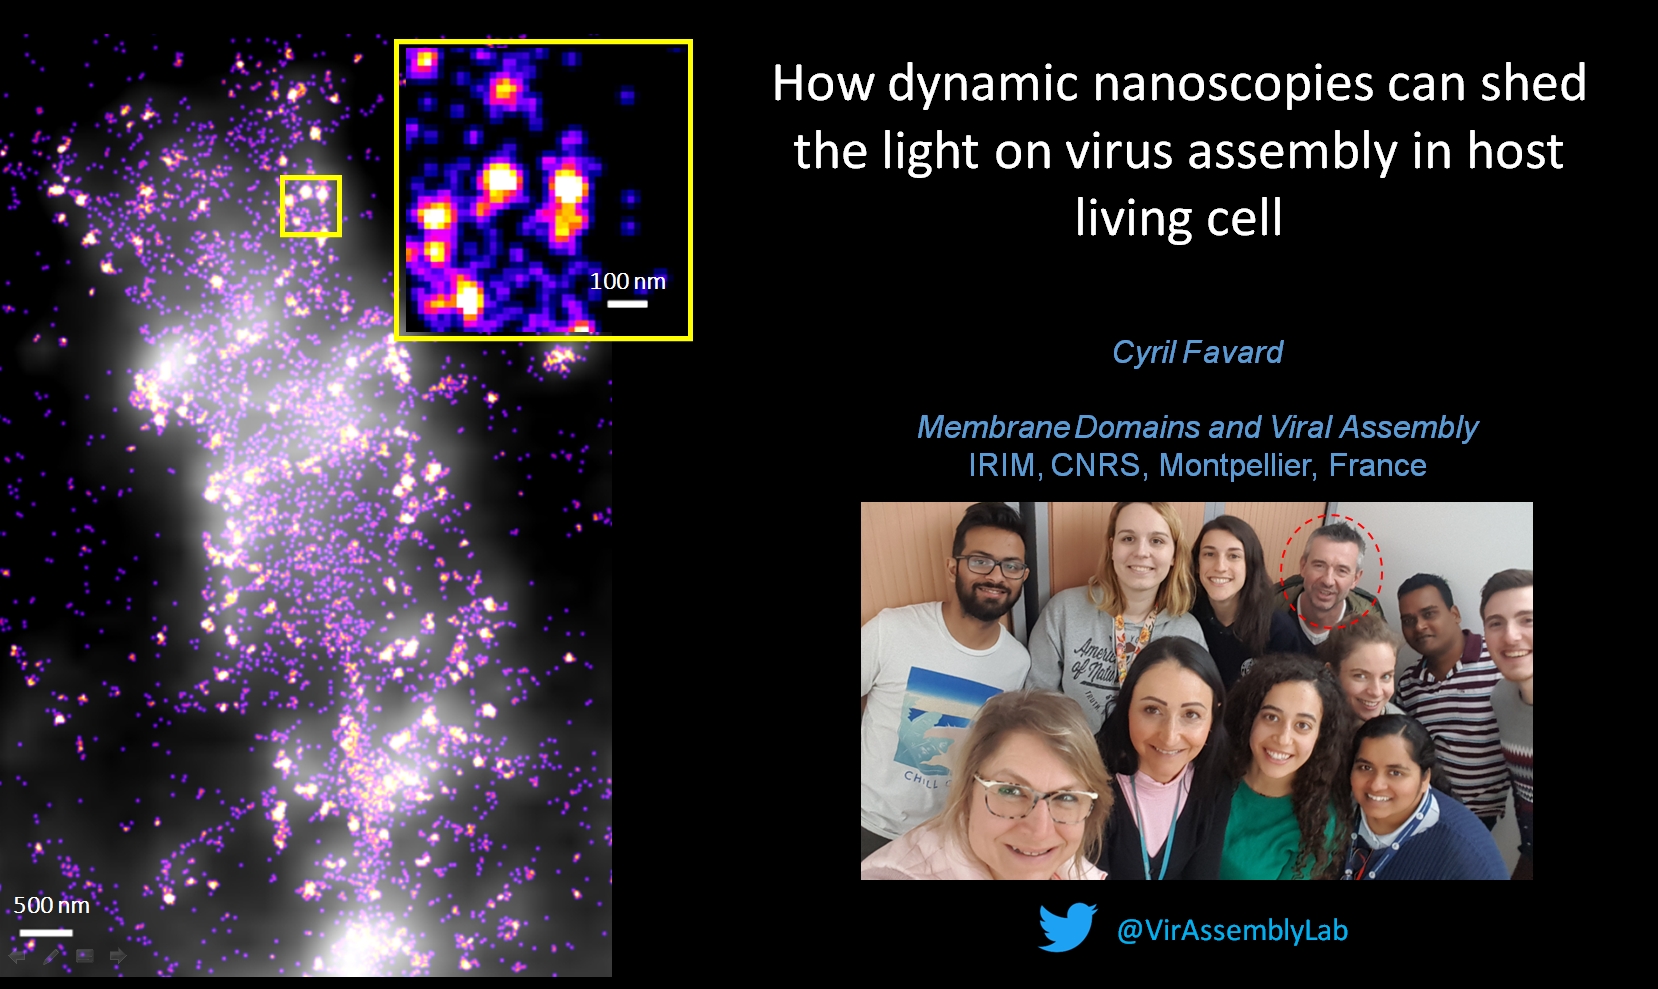 How dynamic nanoscopies can shed the light on virus assembly in host living cell